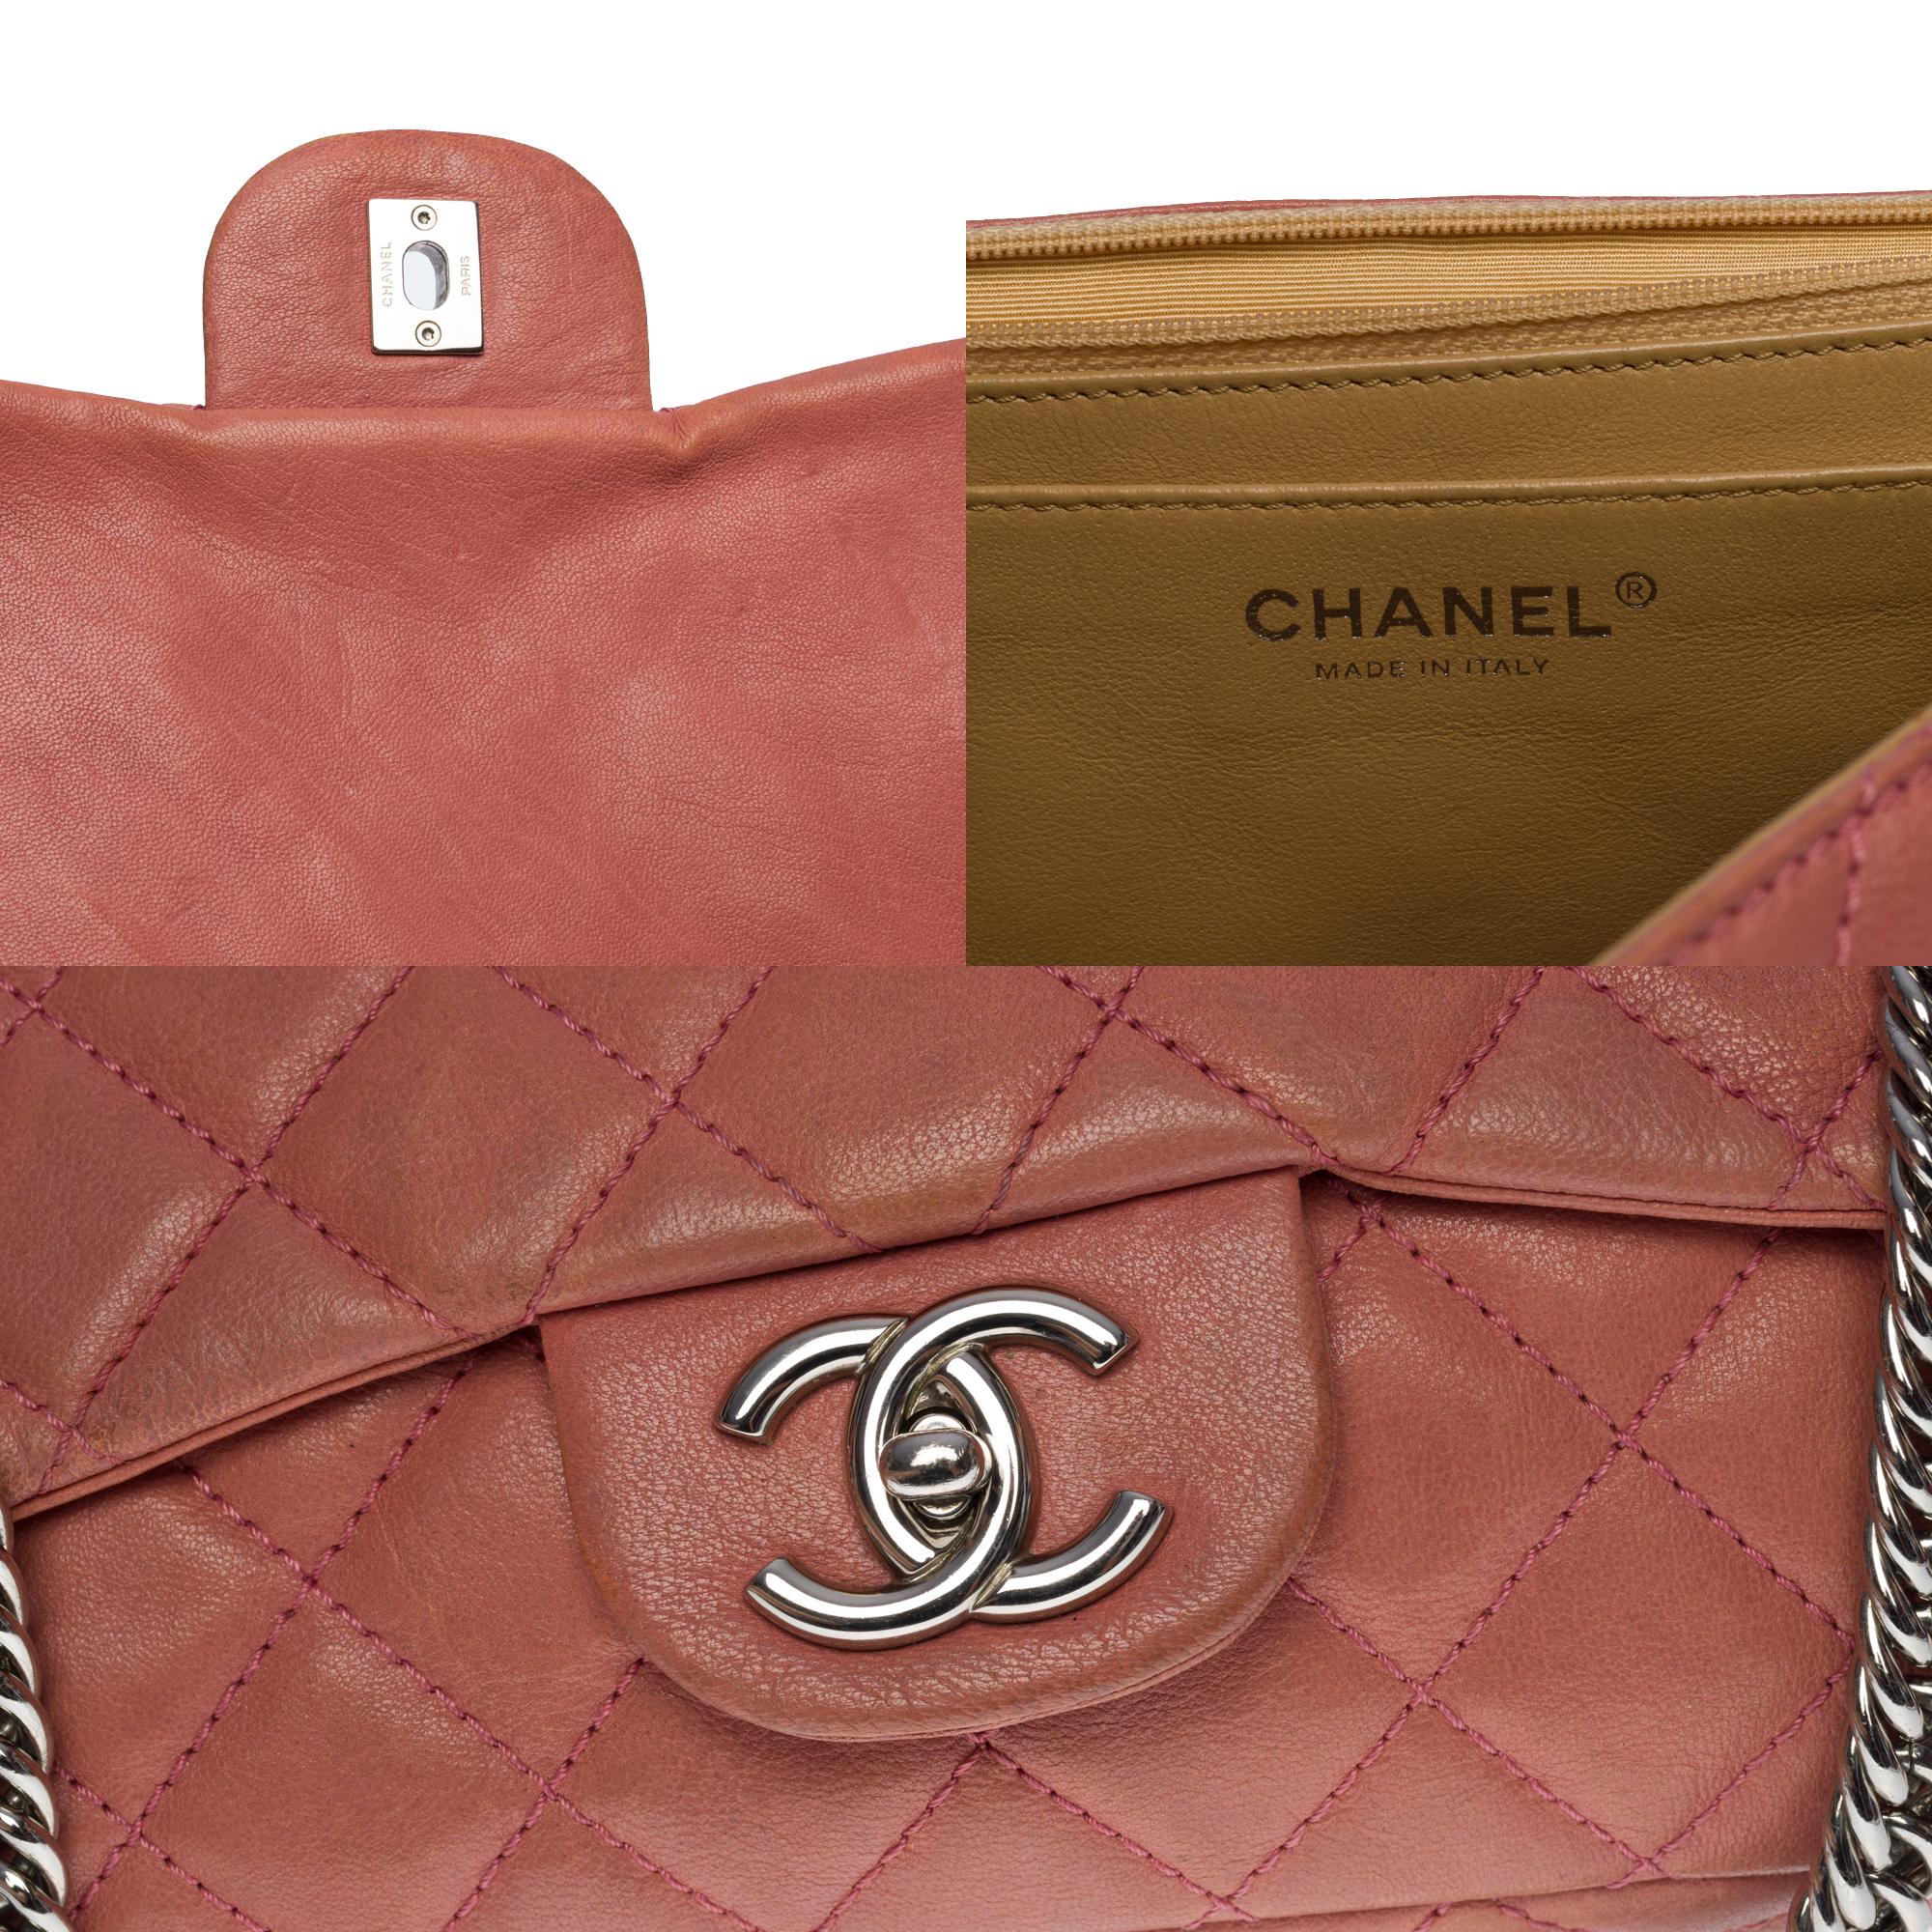  The Chanel Timeless/Classique Jumbo single flap bag handbag in powder pink aged For Sale 1